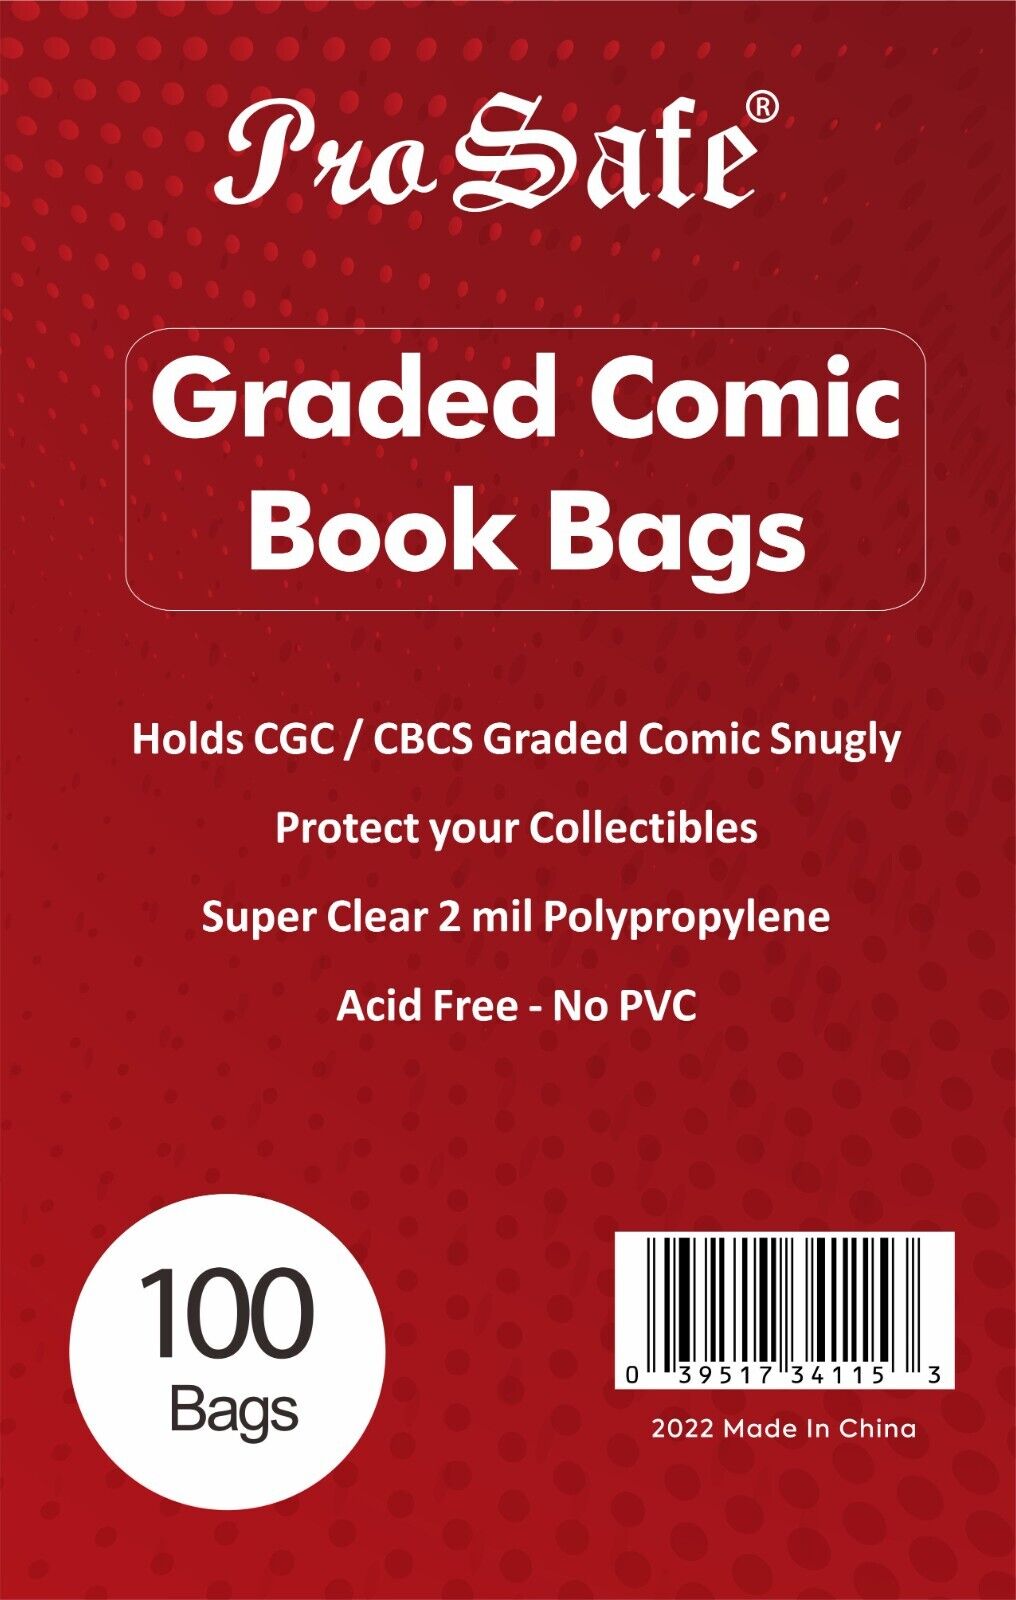 100 PRO SAFE Perfect Fit Graded Comic Book Bags For CGC CBCS - 